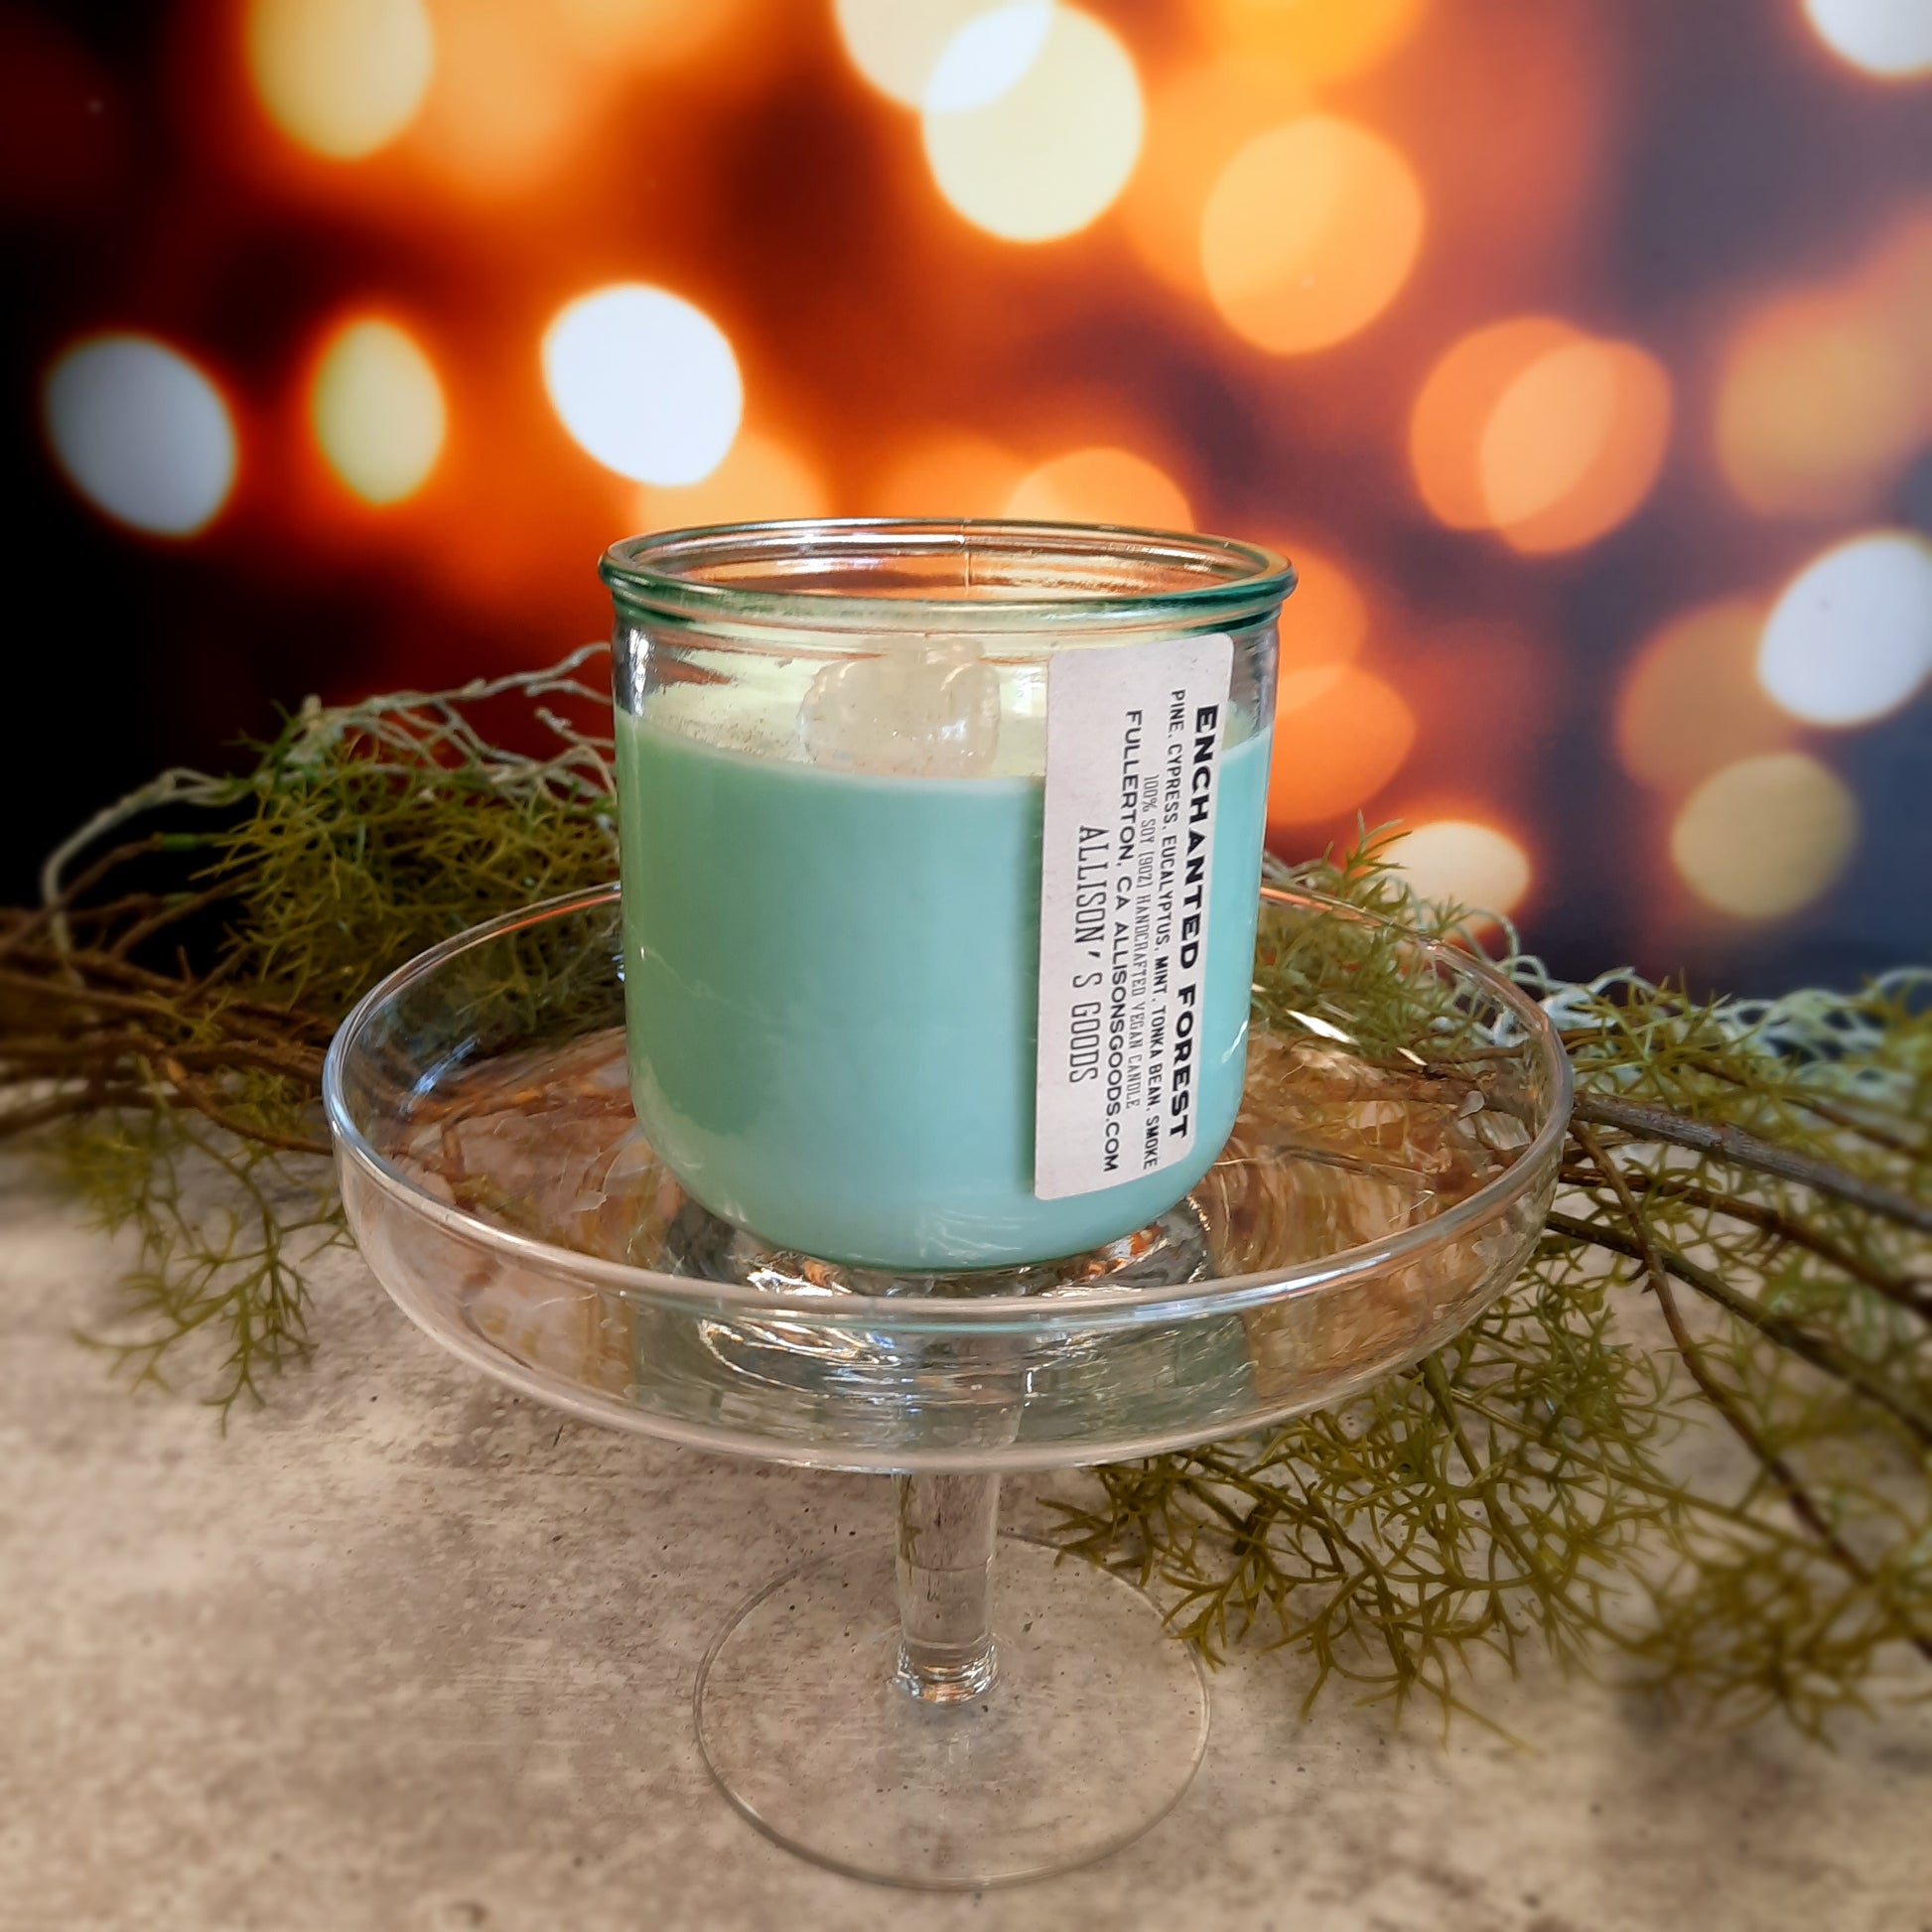 Drink Wisconsinbly Cozy Cabin Candle - Drink Wisconsinbly